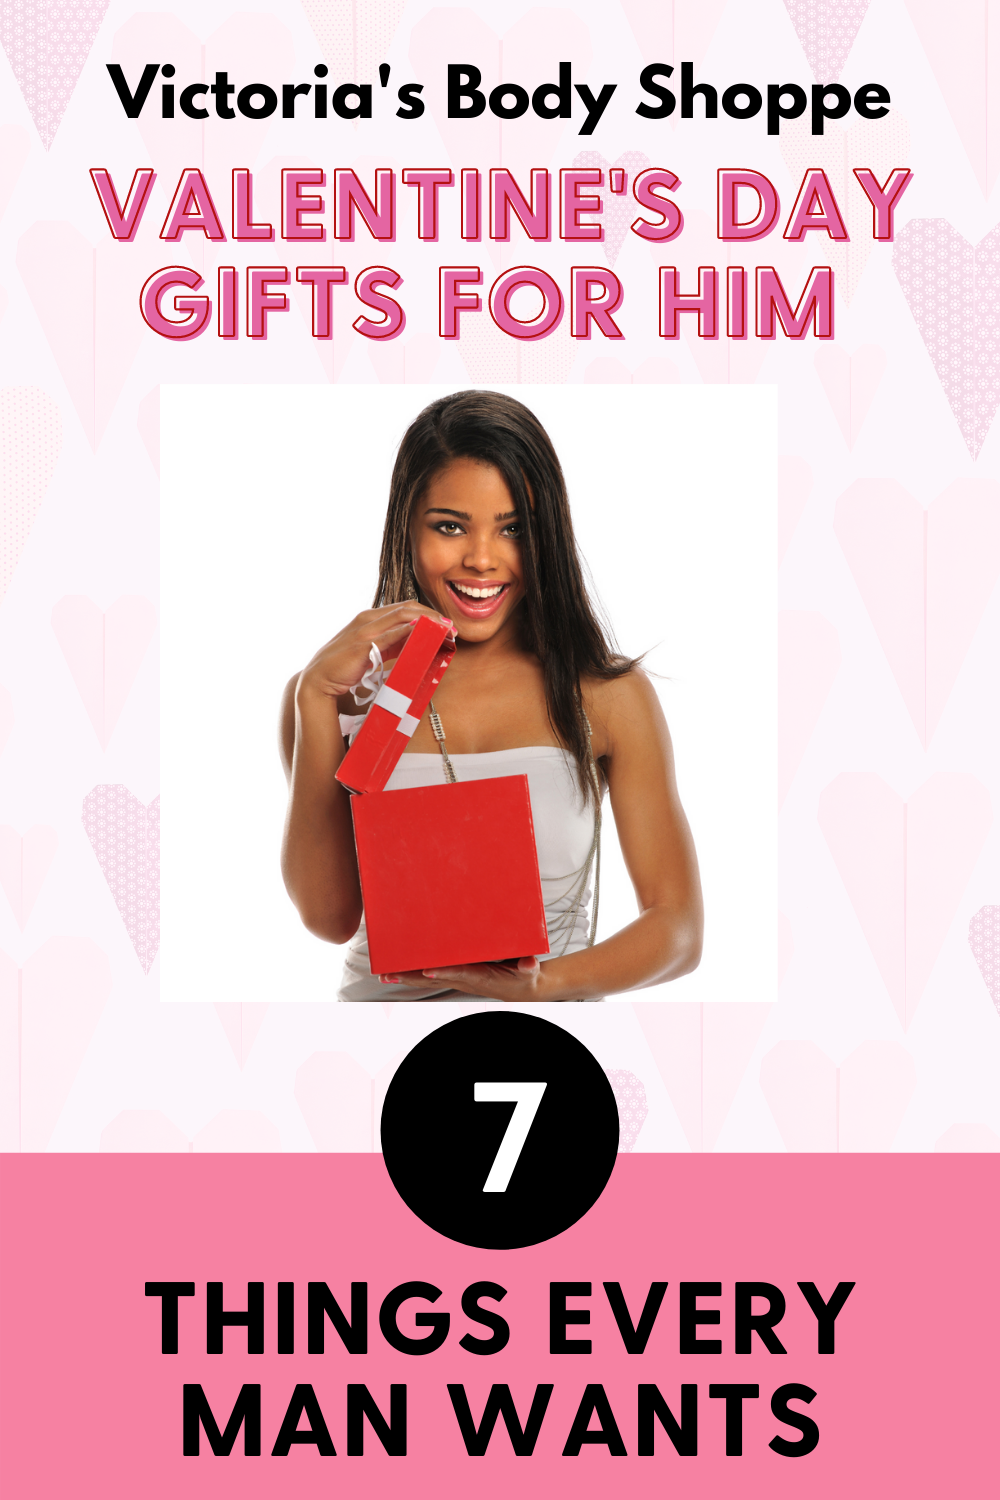 Valentine's Gifts For Him